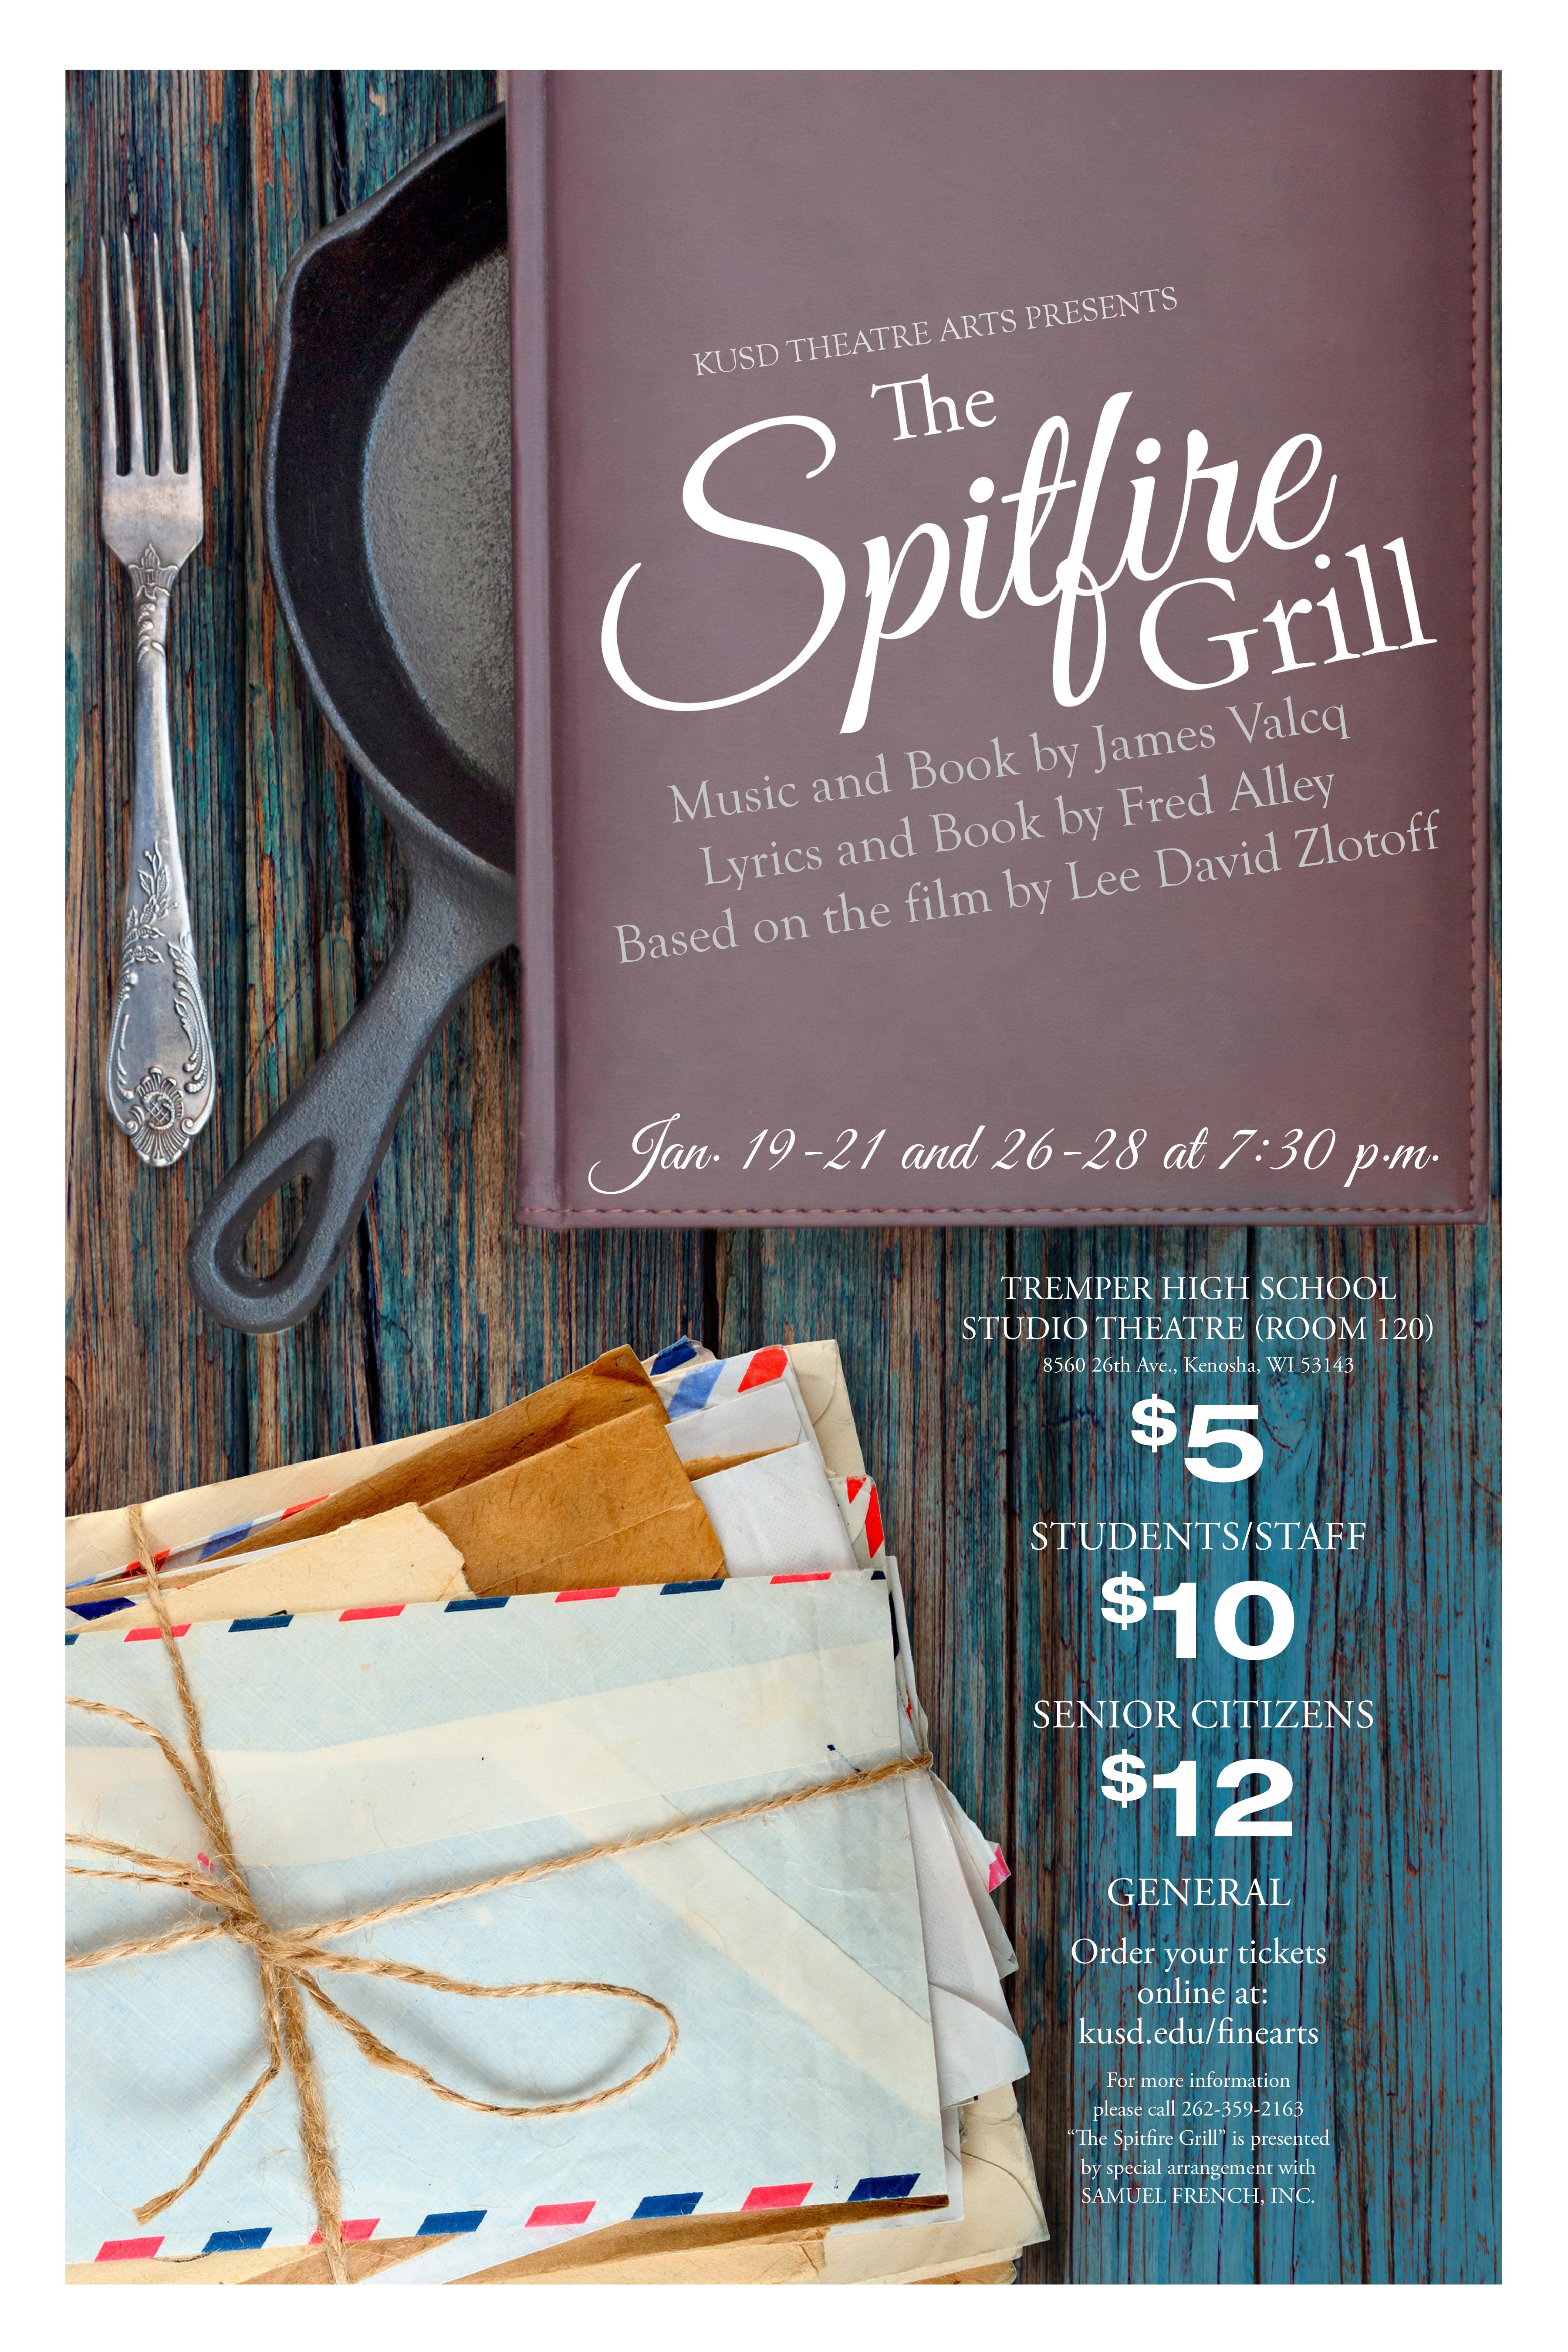 The poster for The Spitfire Grill